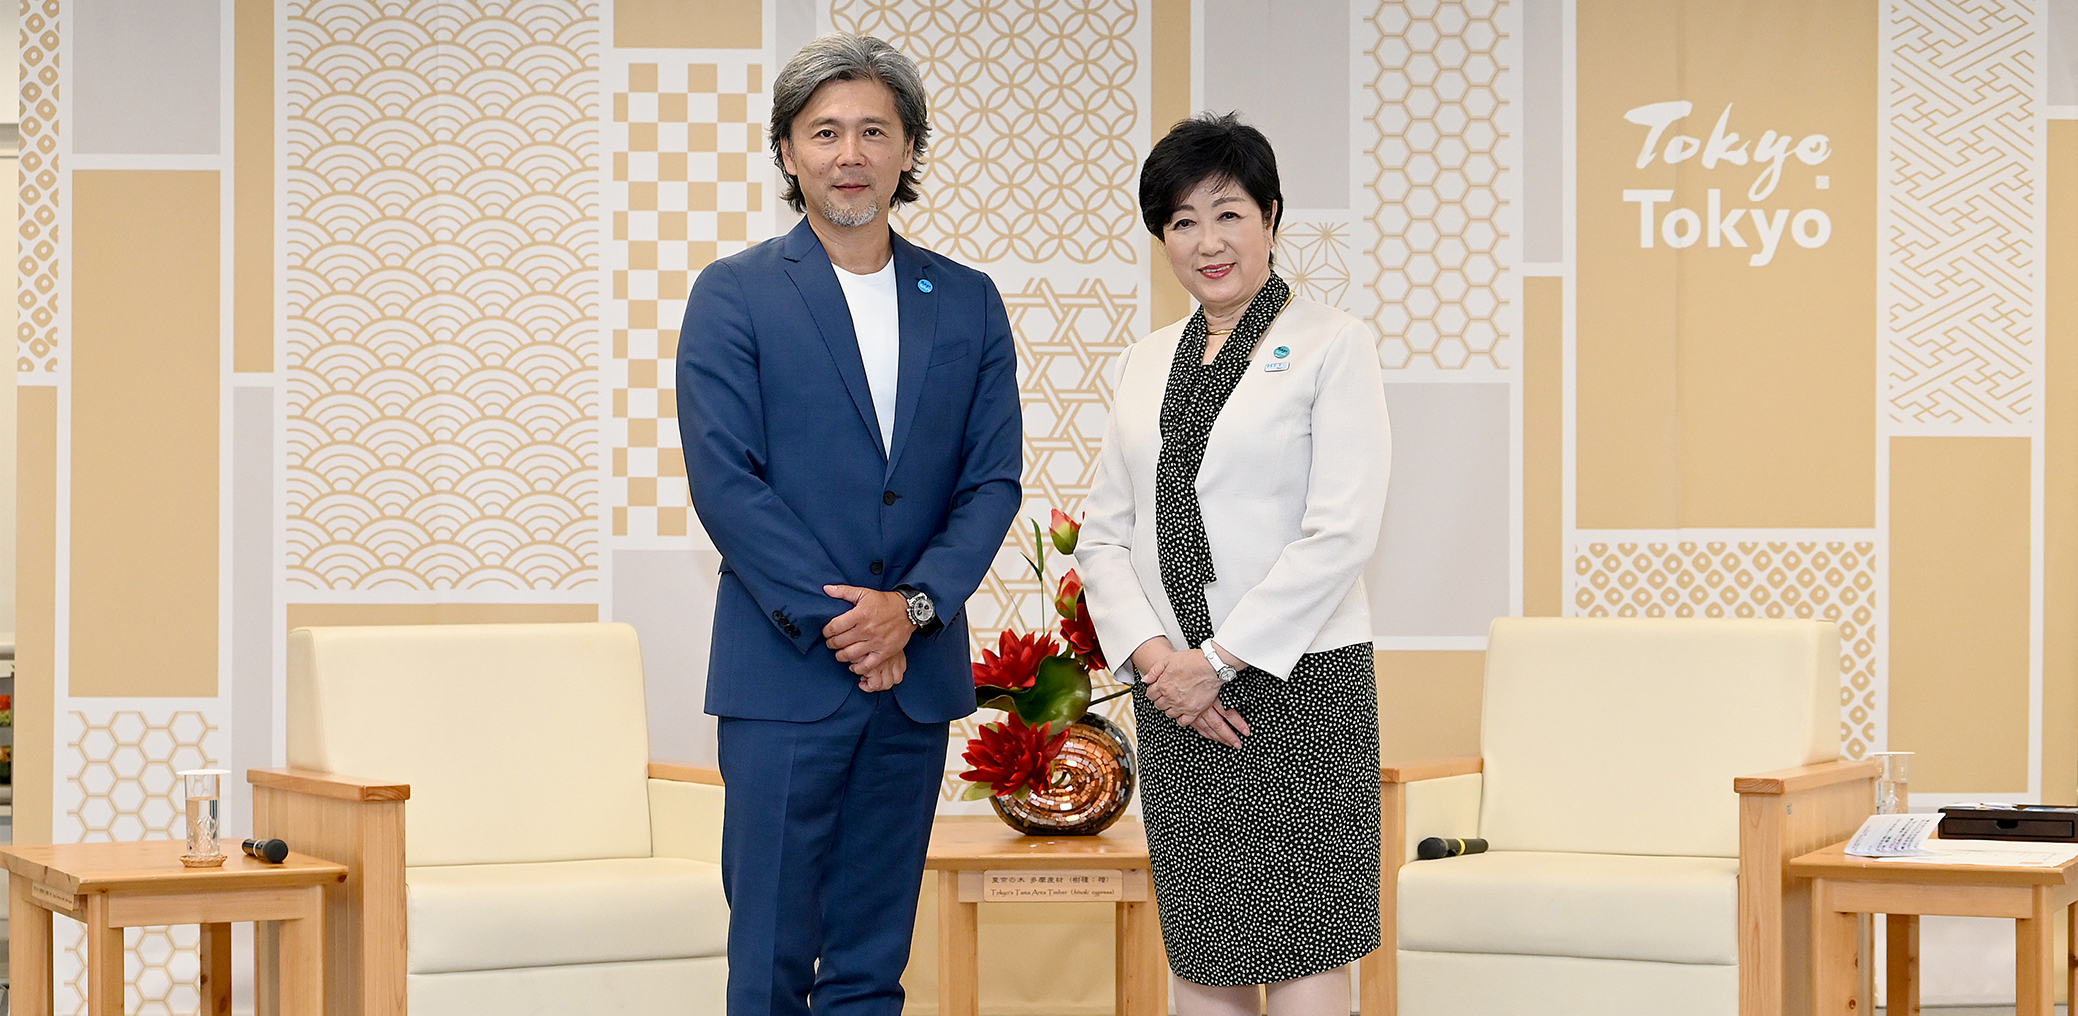 “Tokyo Tourism Ambassadors” have been appointed!7